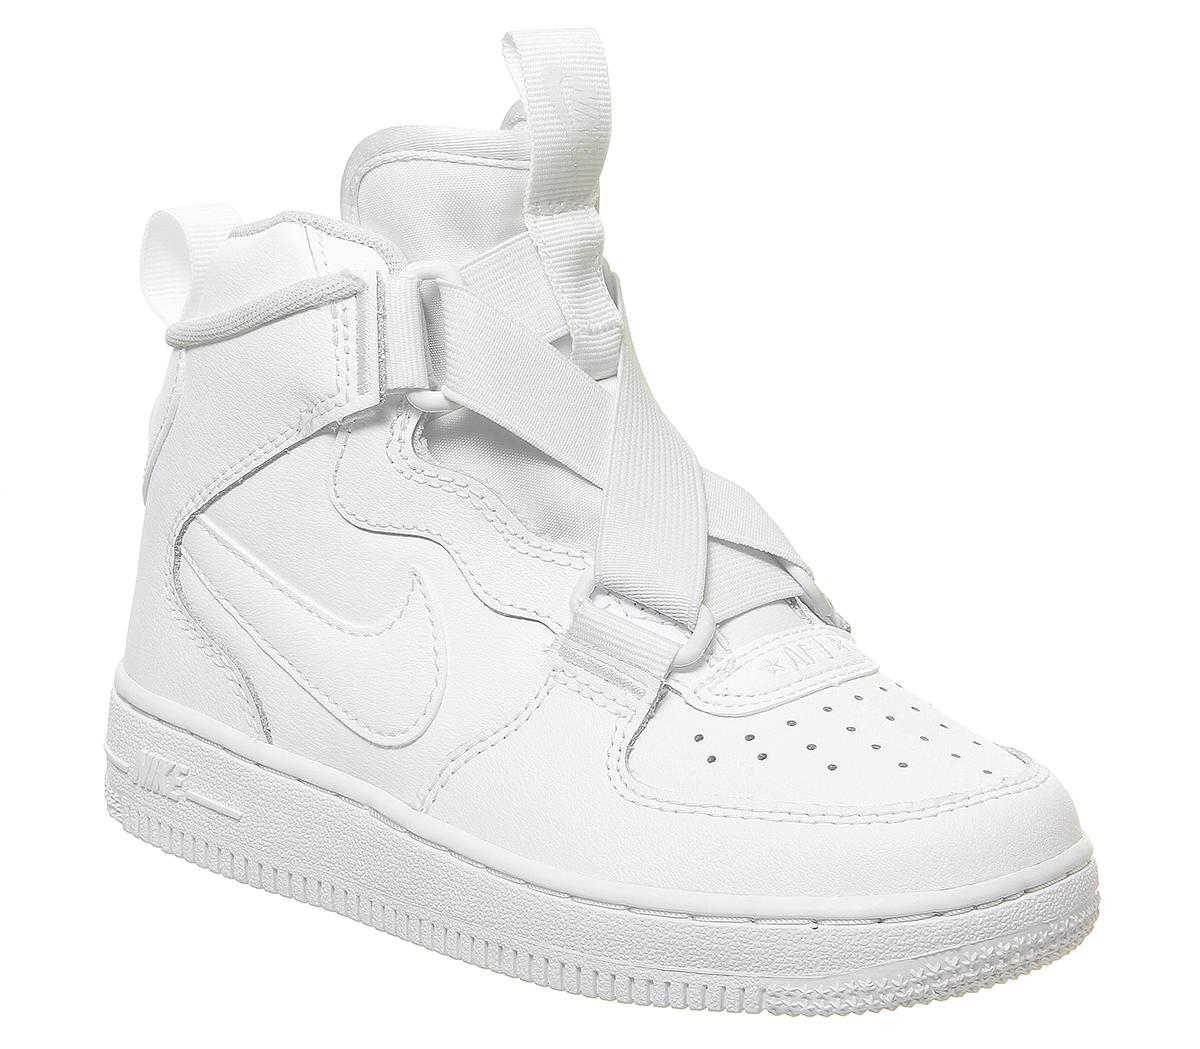 nike air force 1 ps white